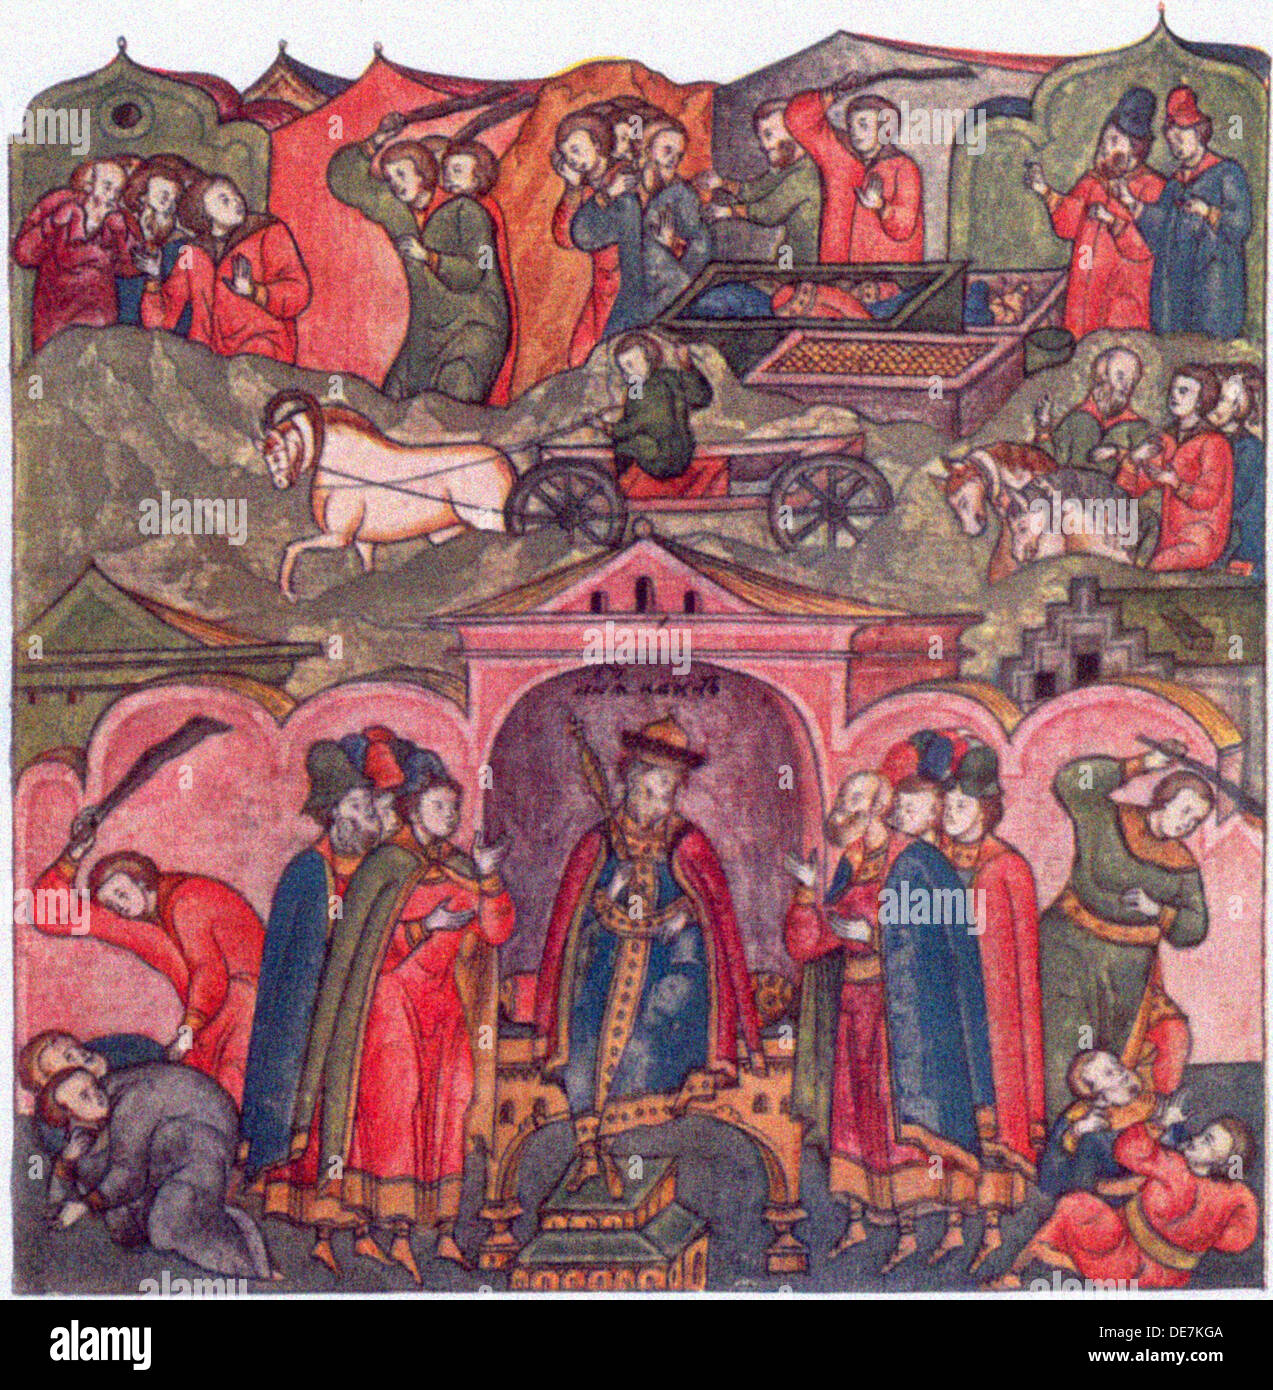 Violence of Moscow Prince Ivan Danilovich and His Neighbors (From: The Life of Saint Sergius of Radonezh), 16th century. Artist: Ancient Russian Art Stock Photo